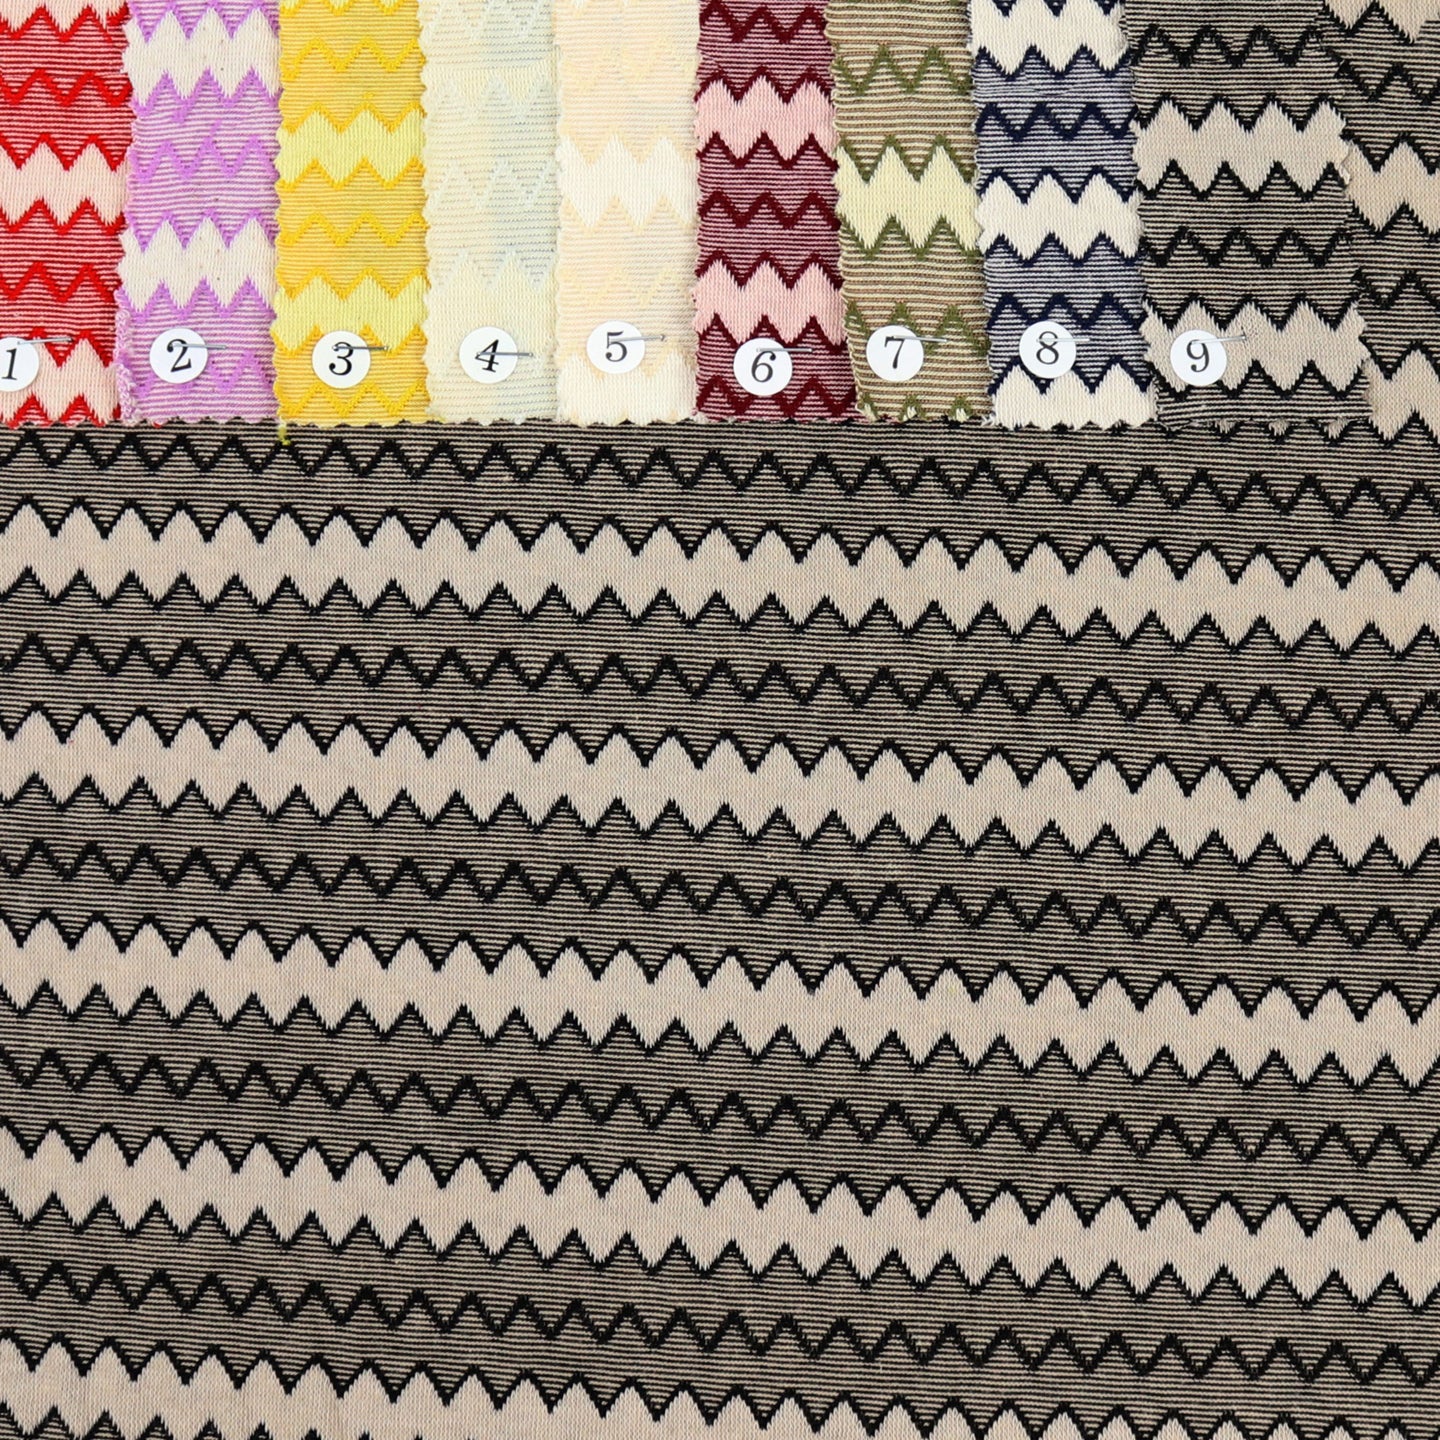 9-Colors Chevron Pattern Cotton/Polyester/Spandex Thunder Knit Fabric by the Yard, 52-54